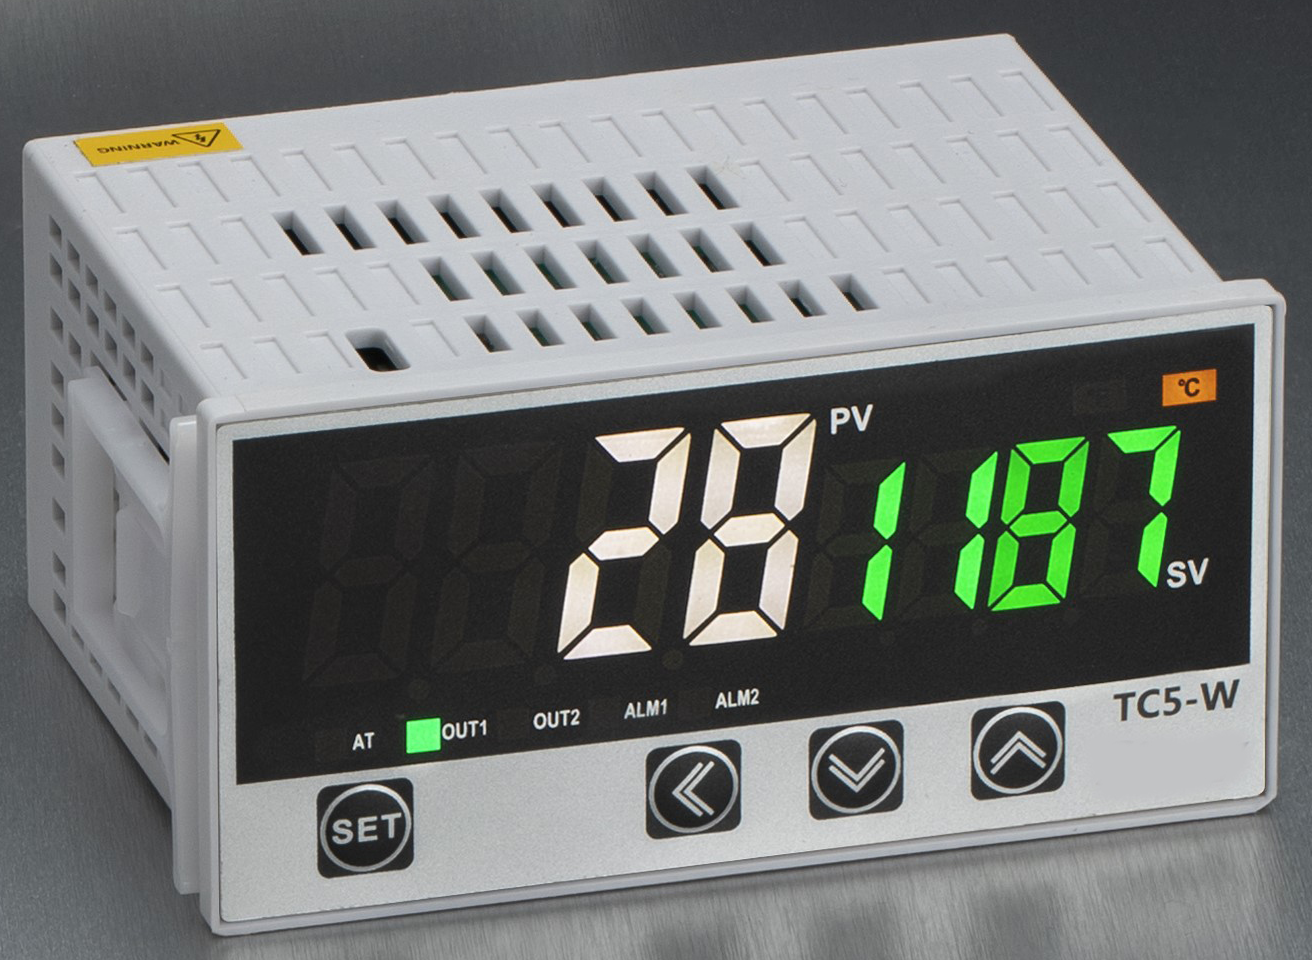 TC5-W-W-2-T/R-2 PID Controller, 100-240VAC with 2 3 Amp Relay Alarms, K,E,J Thermocouple, Pt100 or Cu20, Optional Linear Current/Voltage, 96x48mm,Relay + 12VDC Output